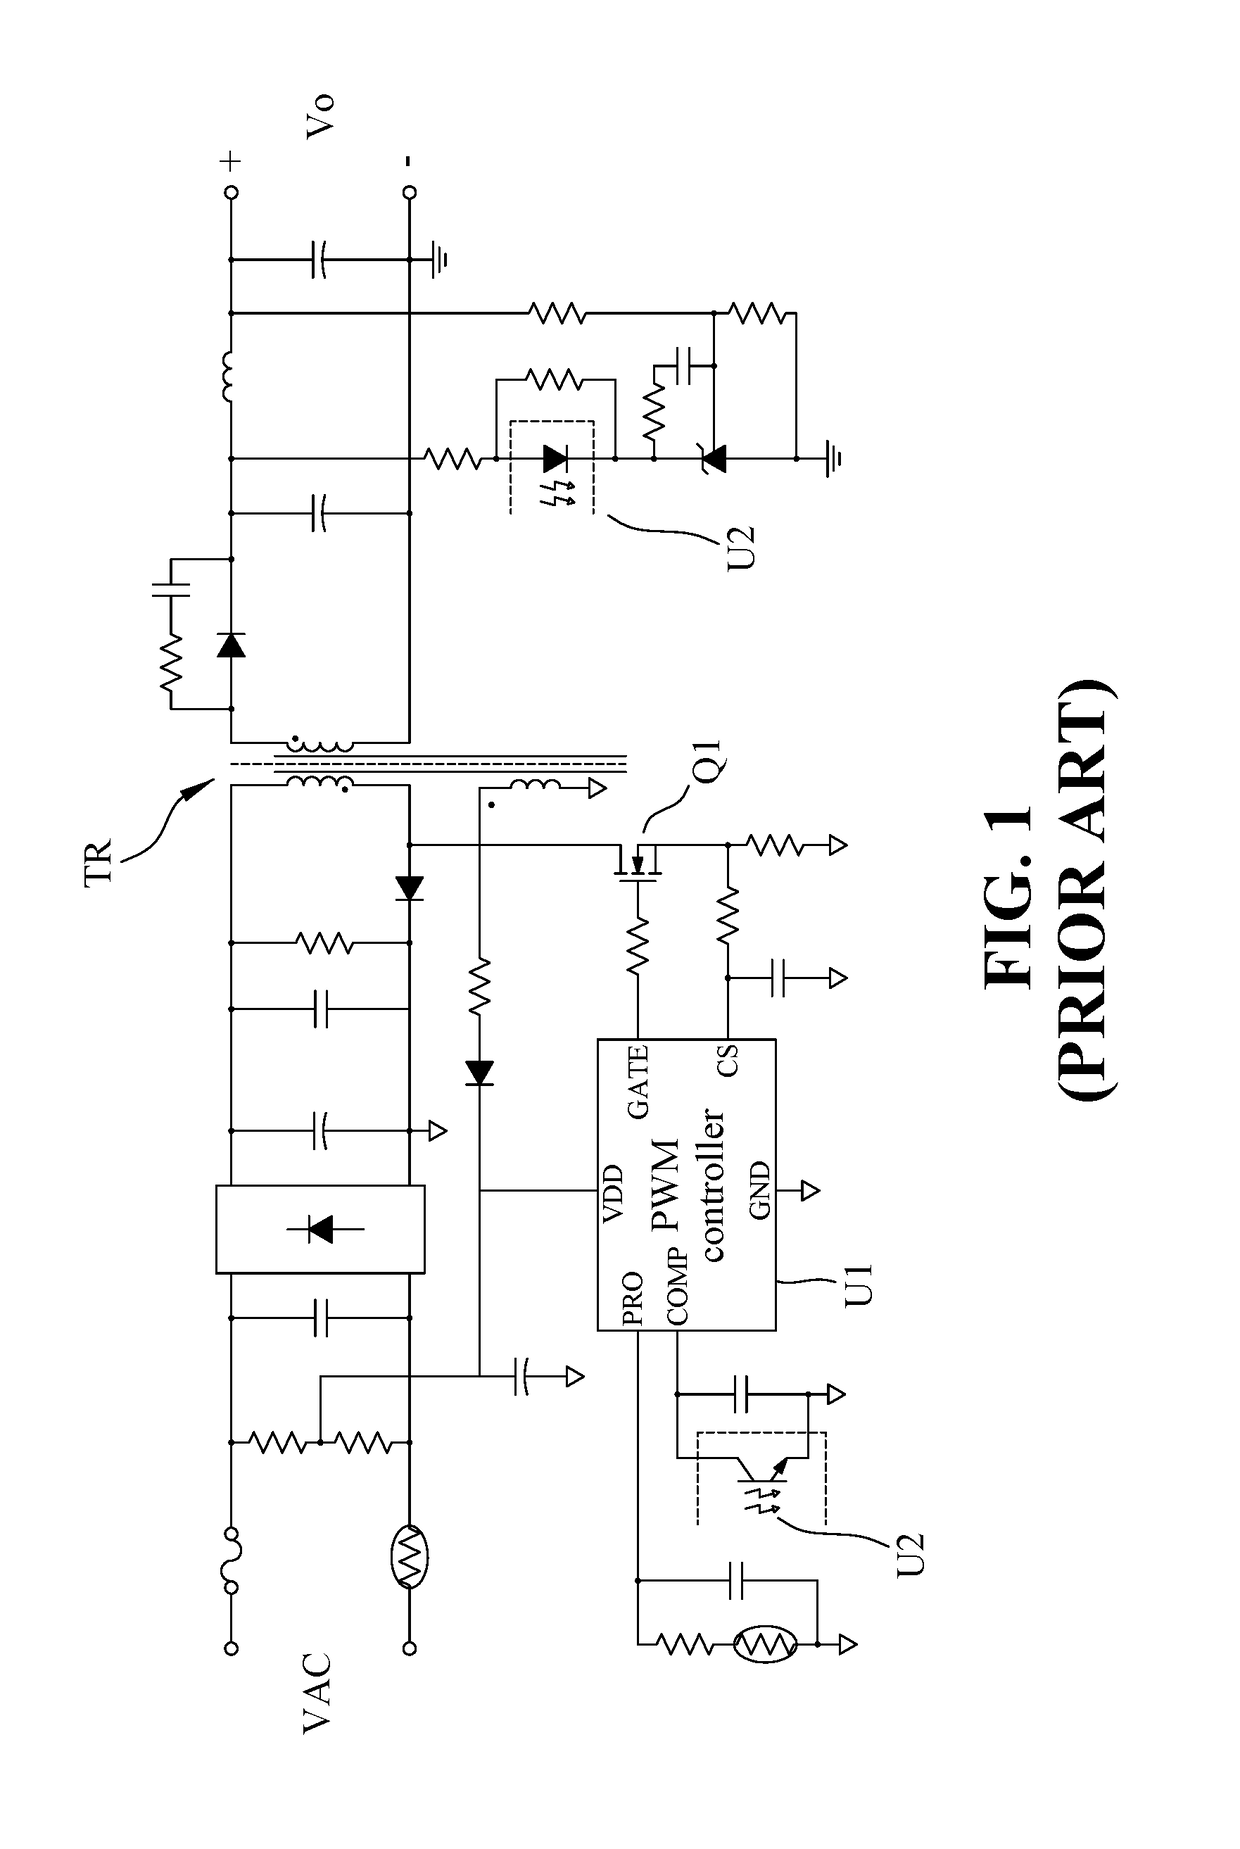 Isolated power conversion system